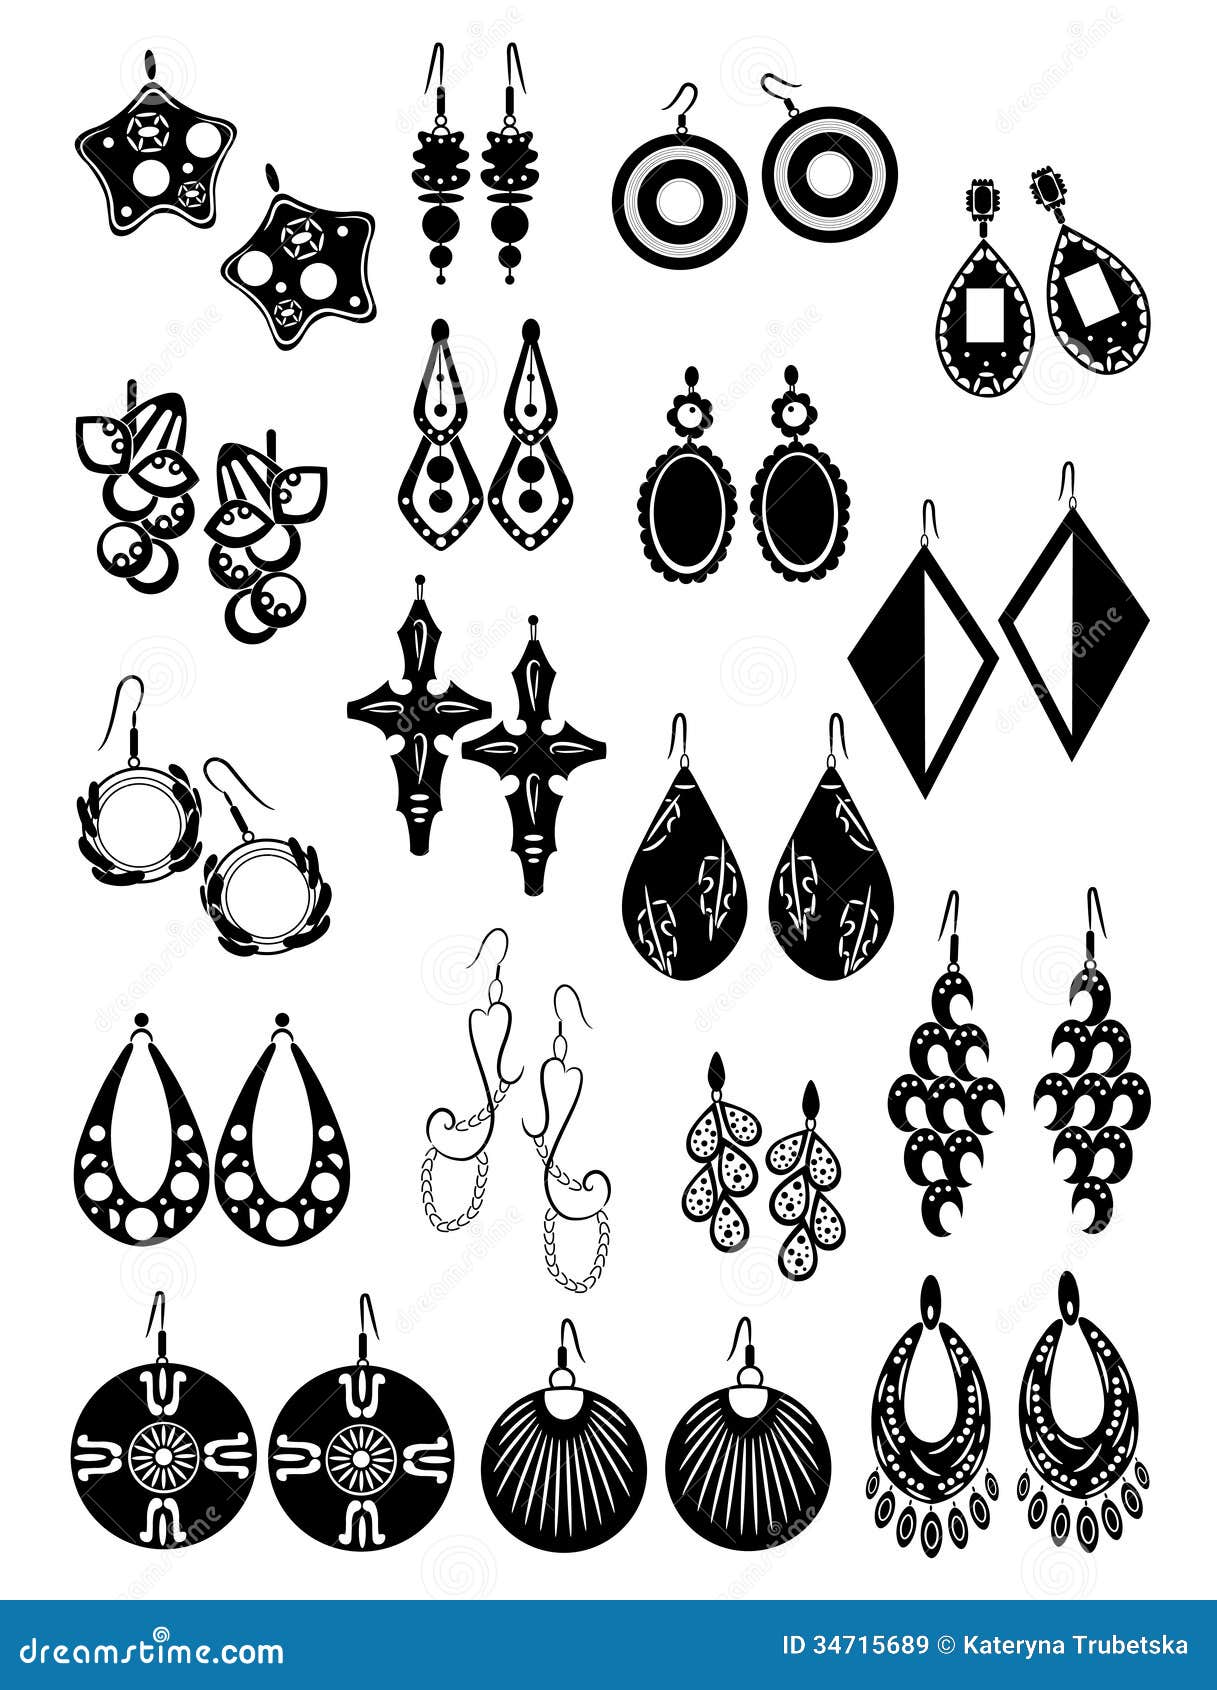 clip art for jewelry business - photo #45